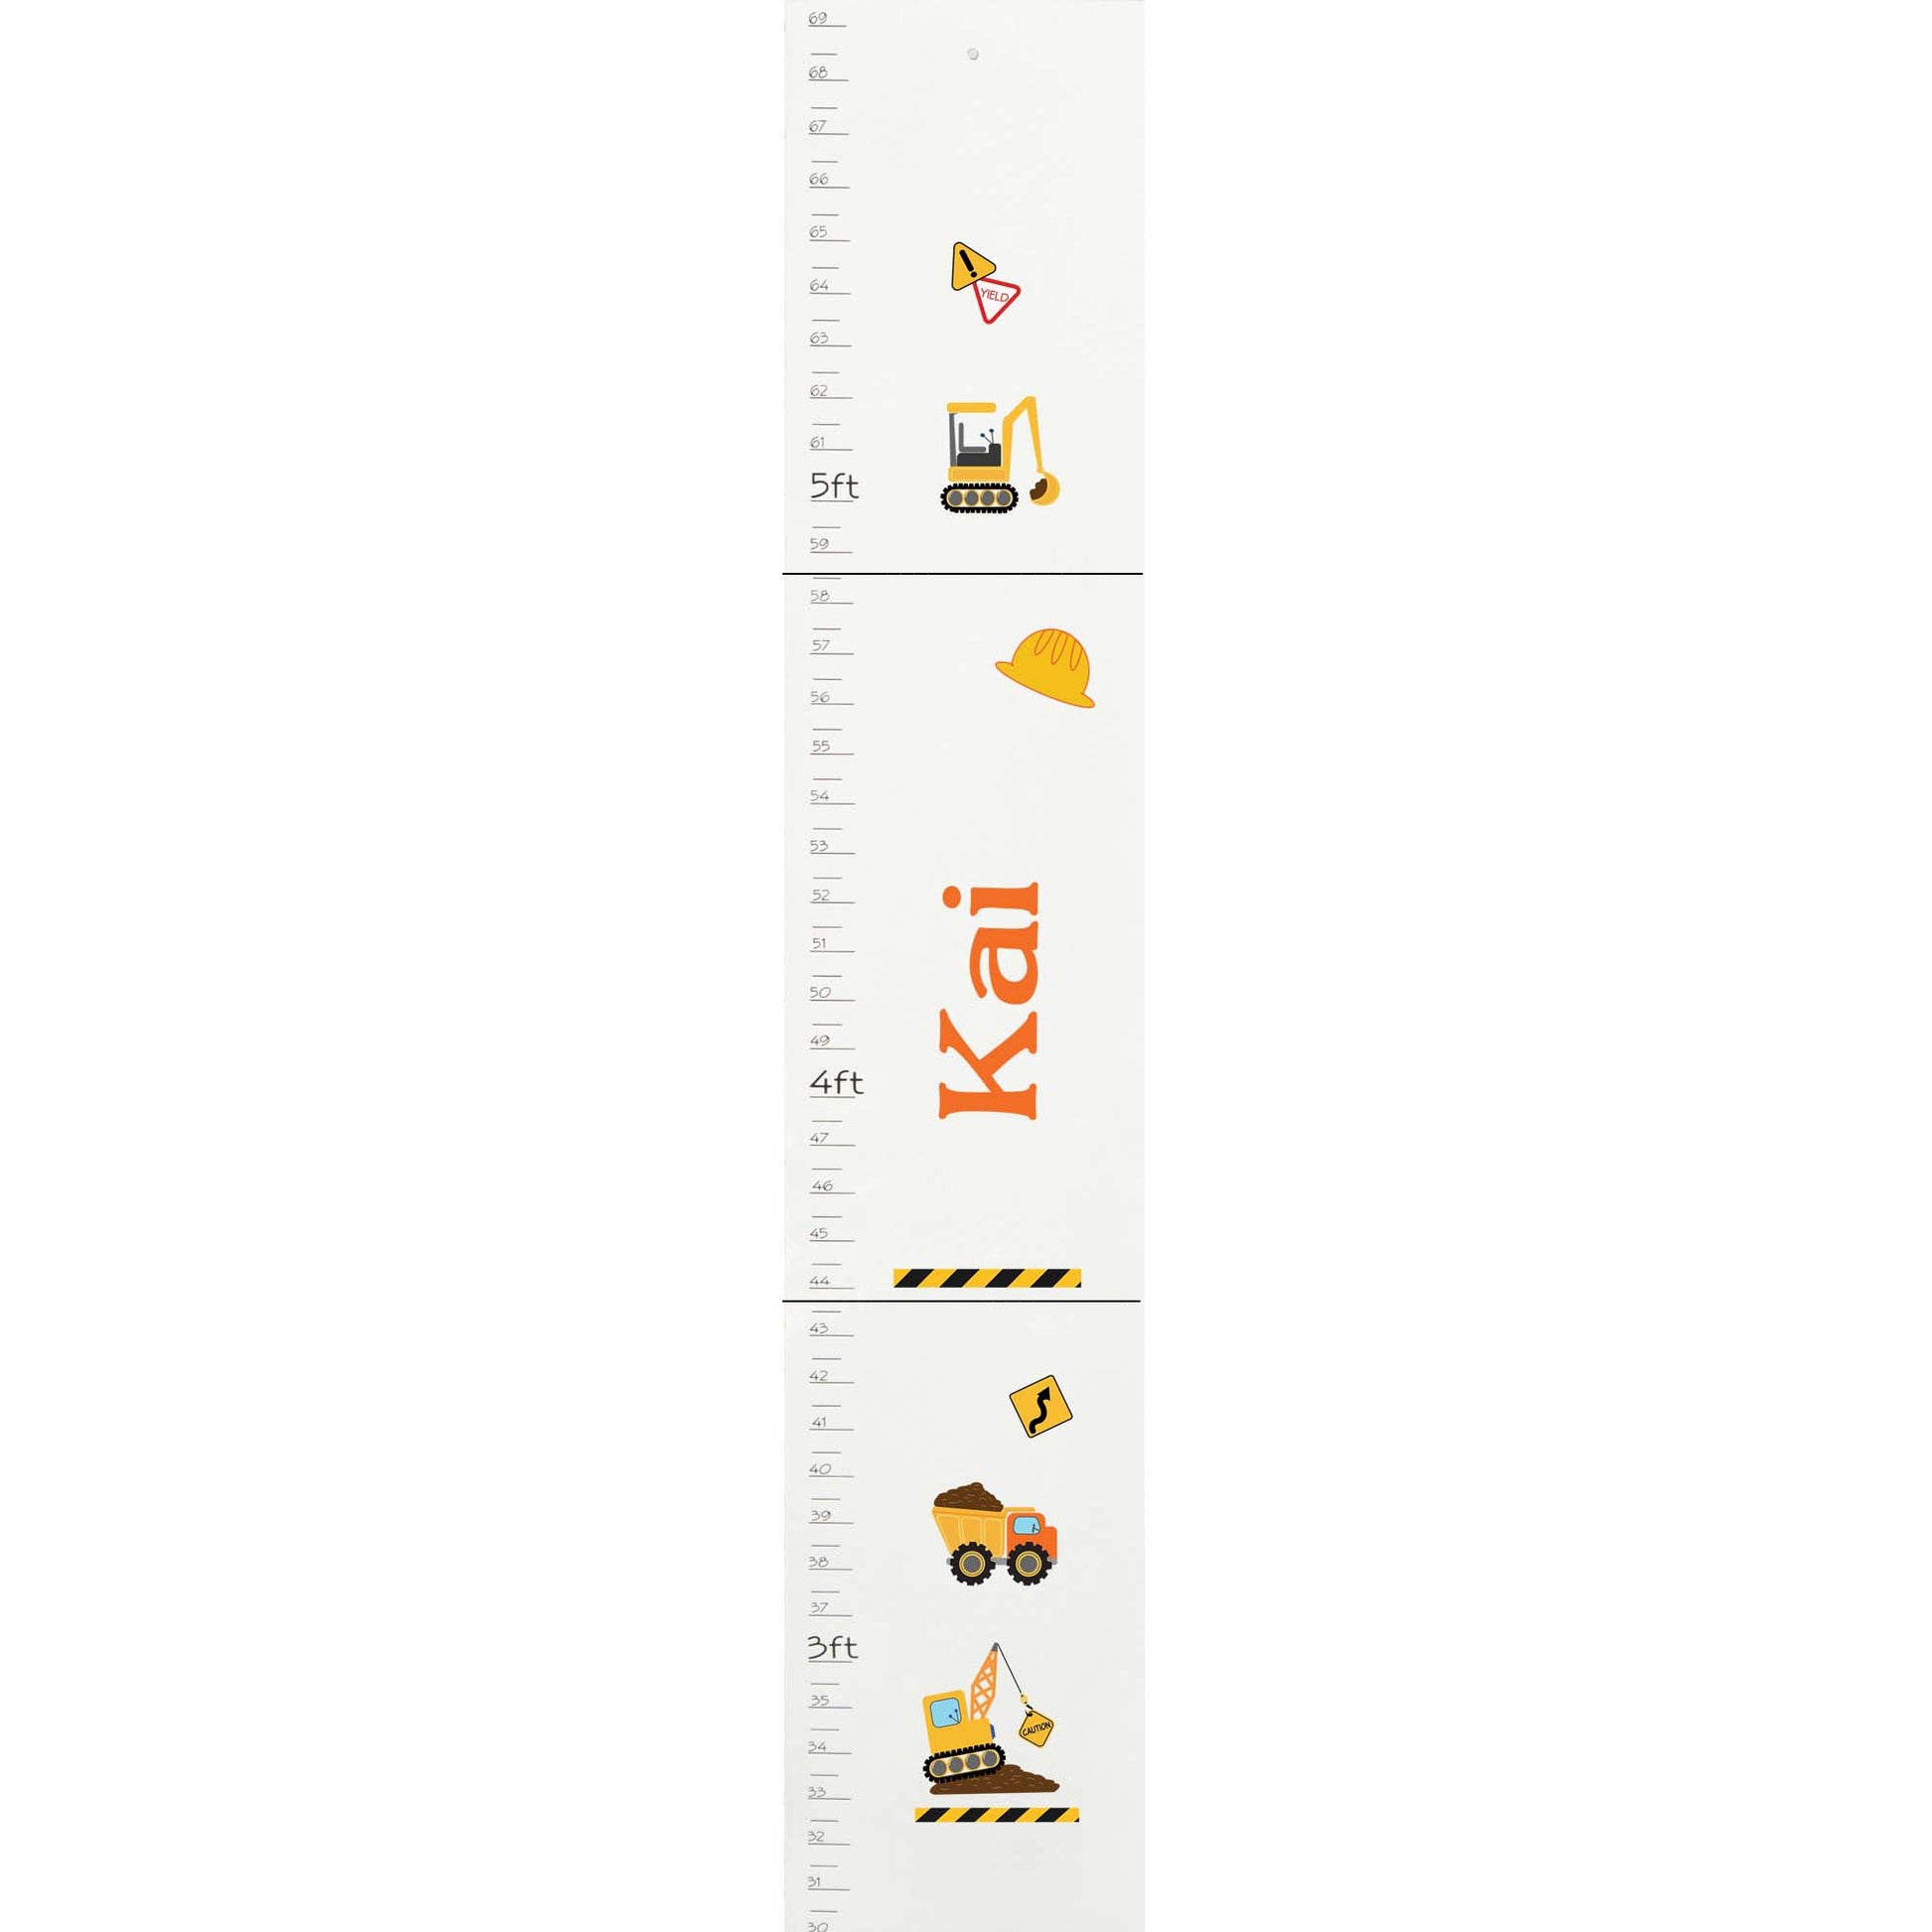 Personalized White dinosaur Growth Chart